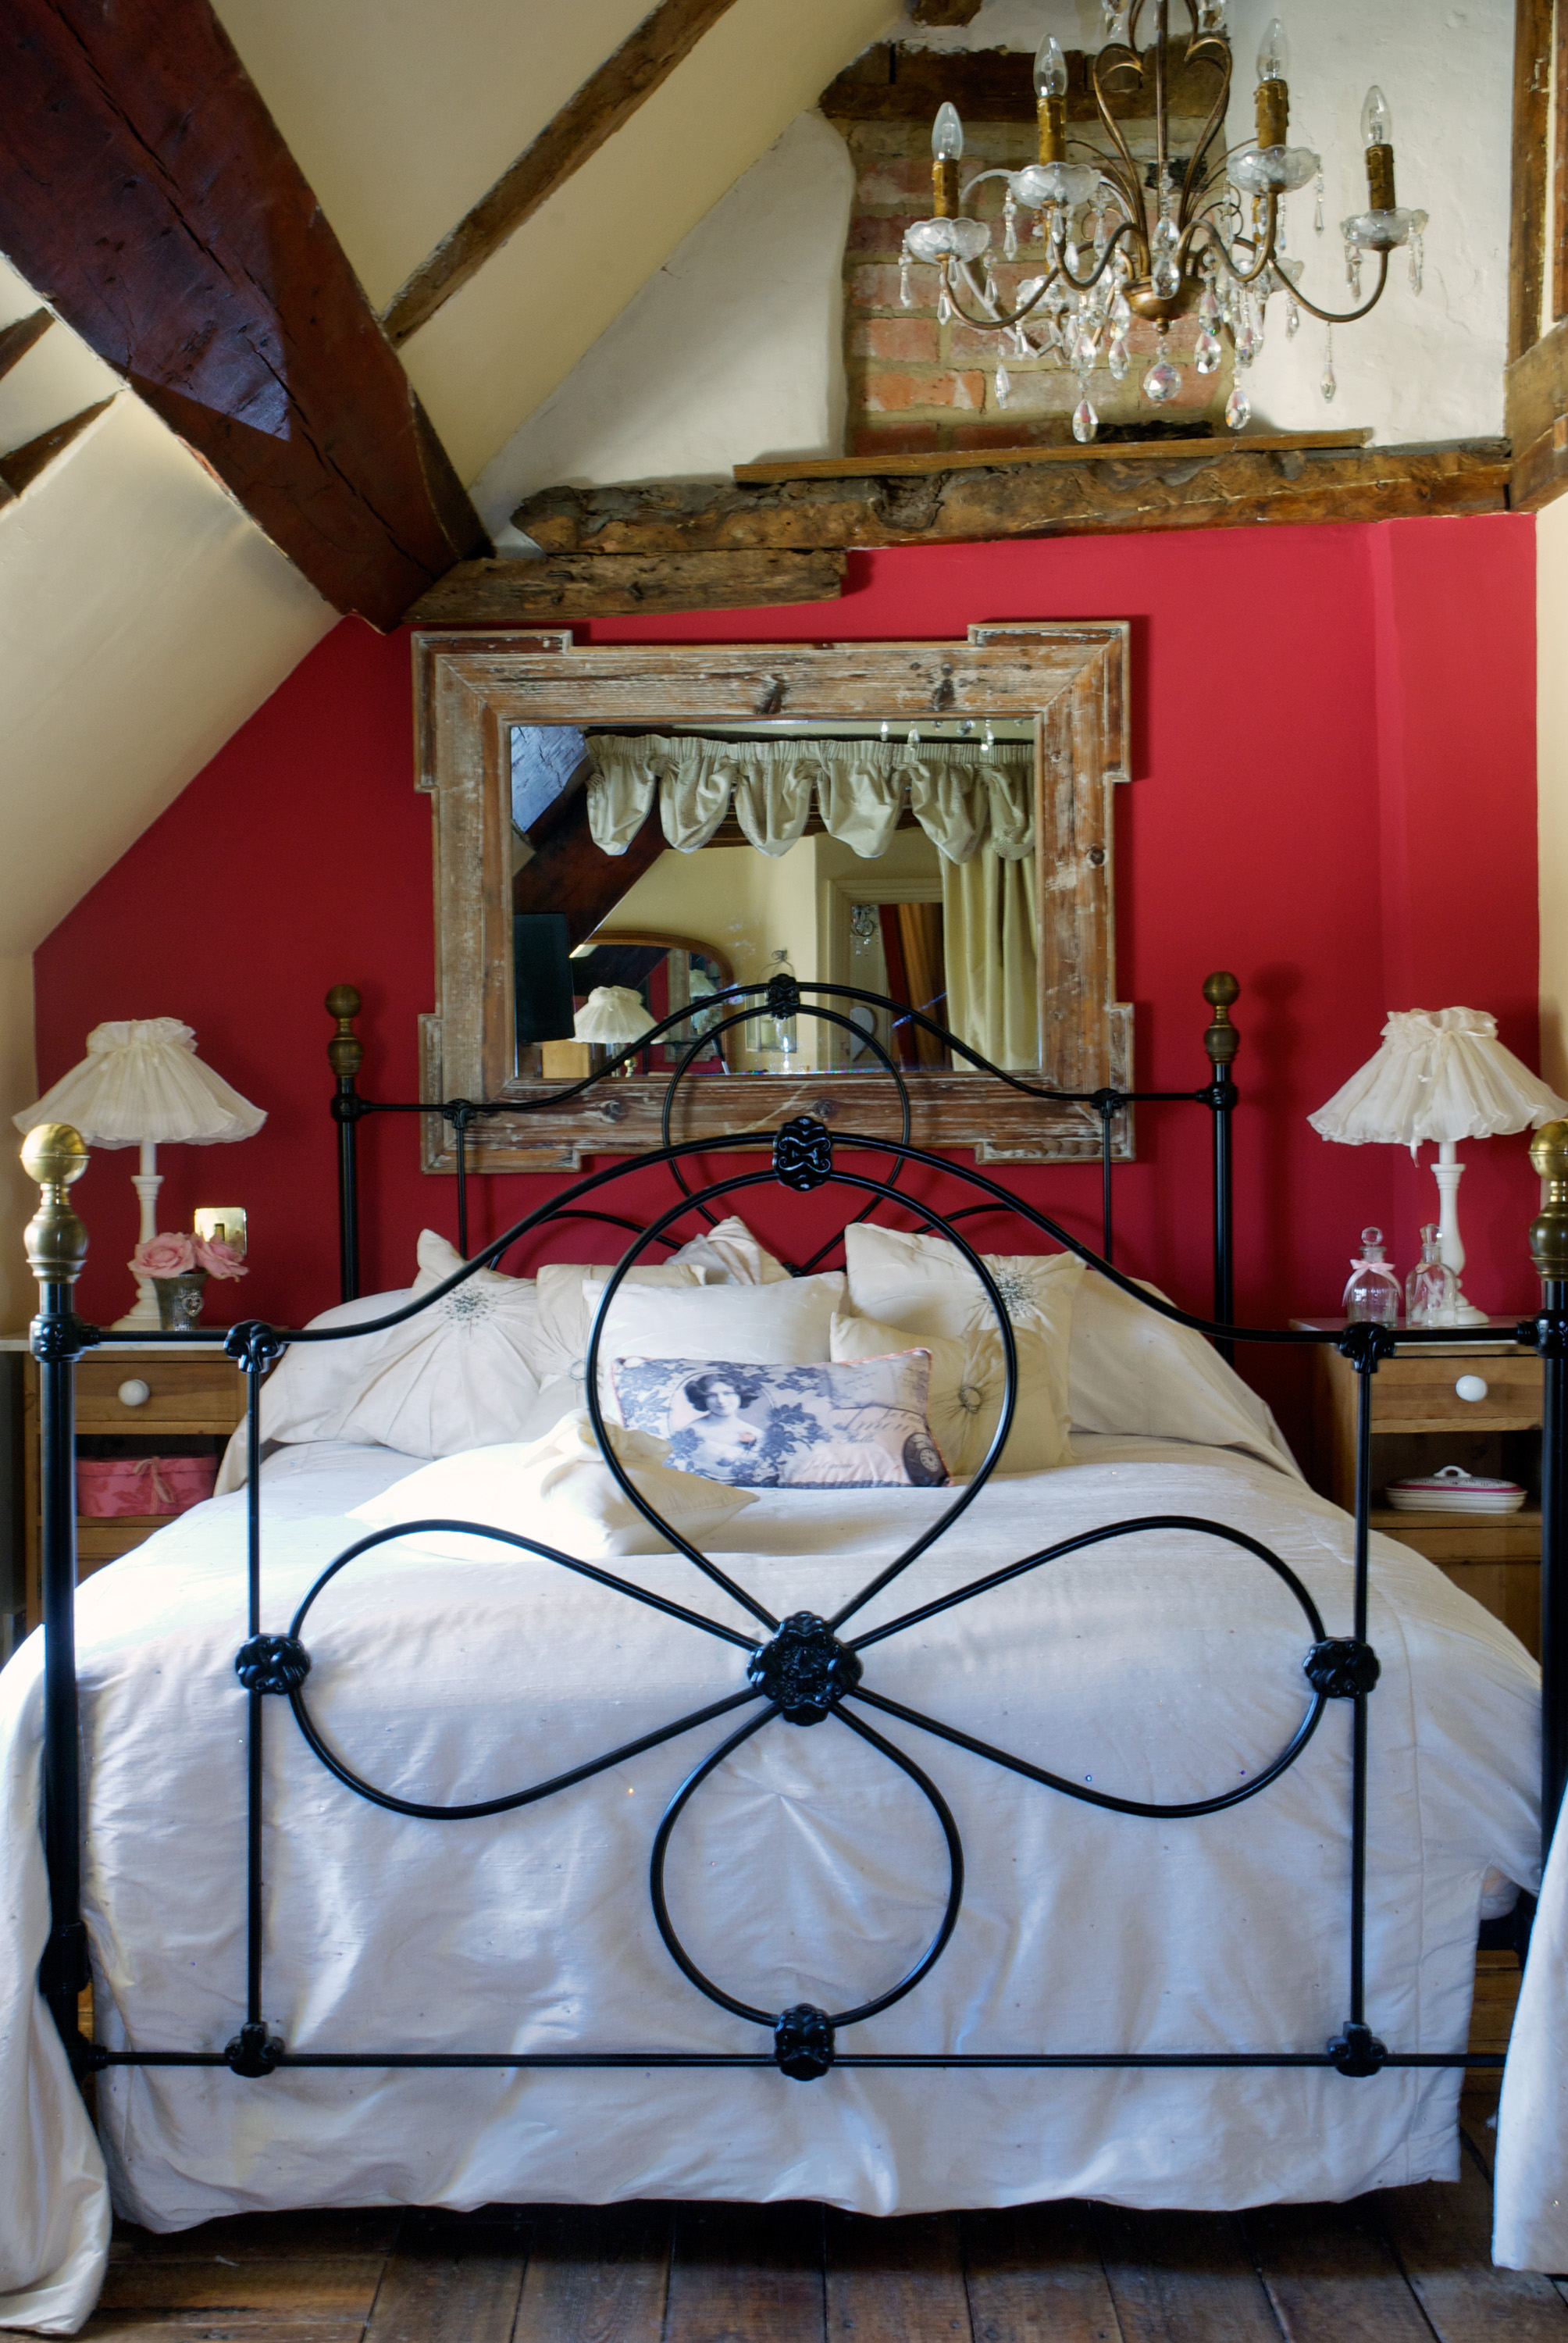 A red bedroom with iron bed mirror, wooden beams and glass chandelier